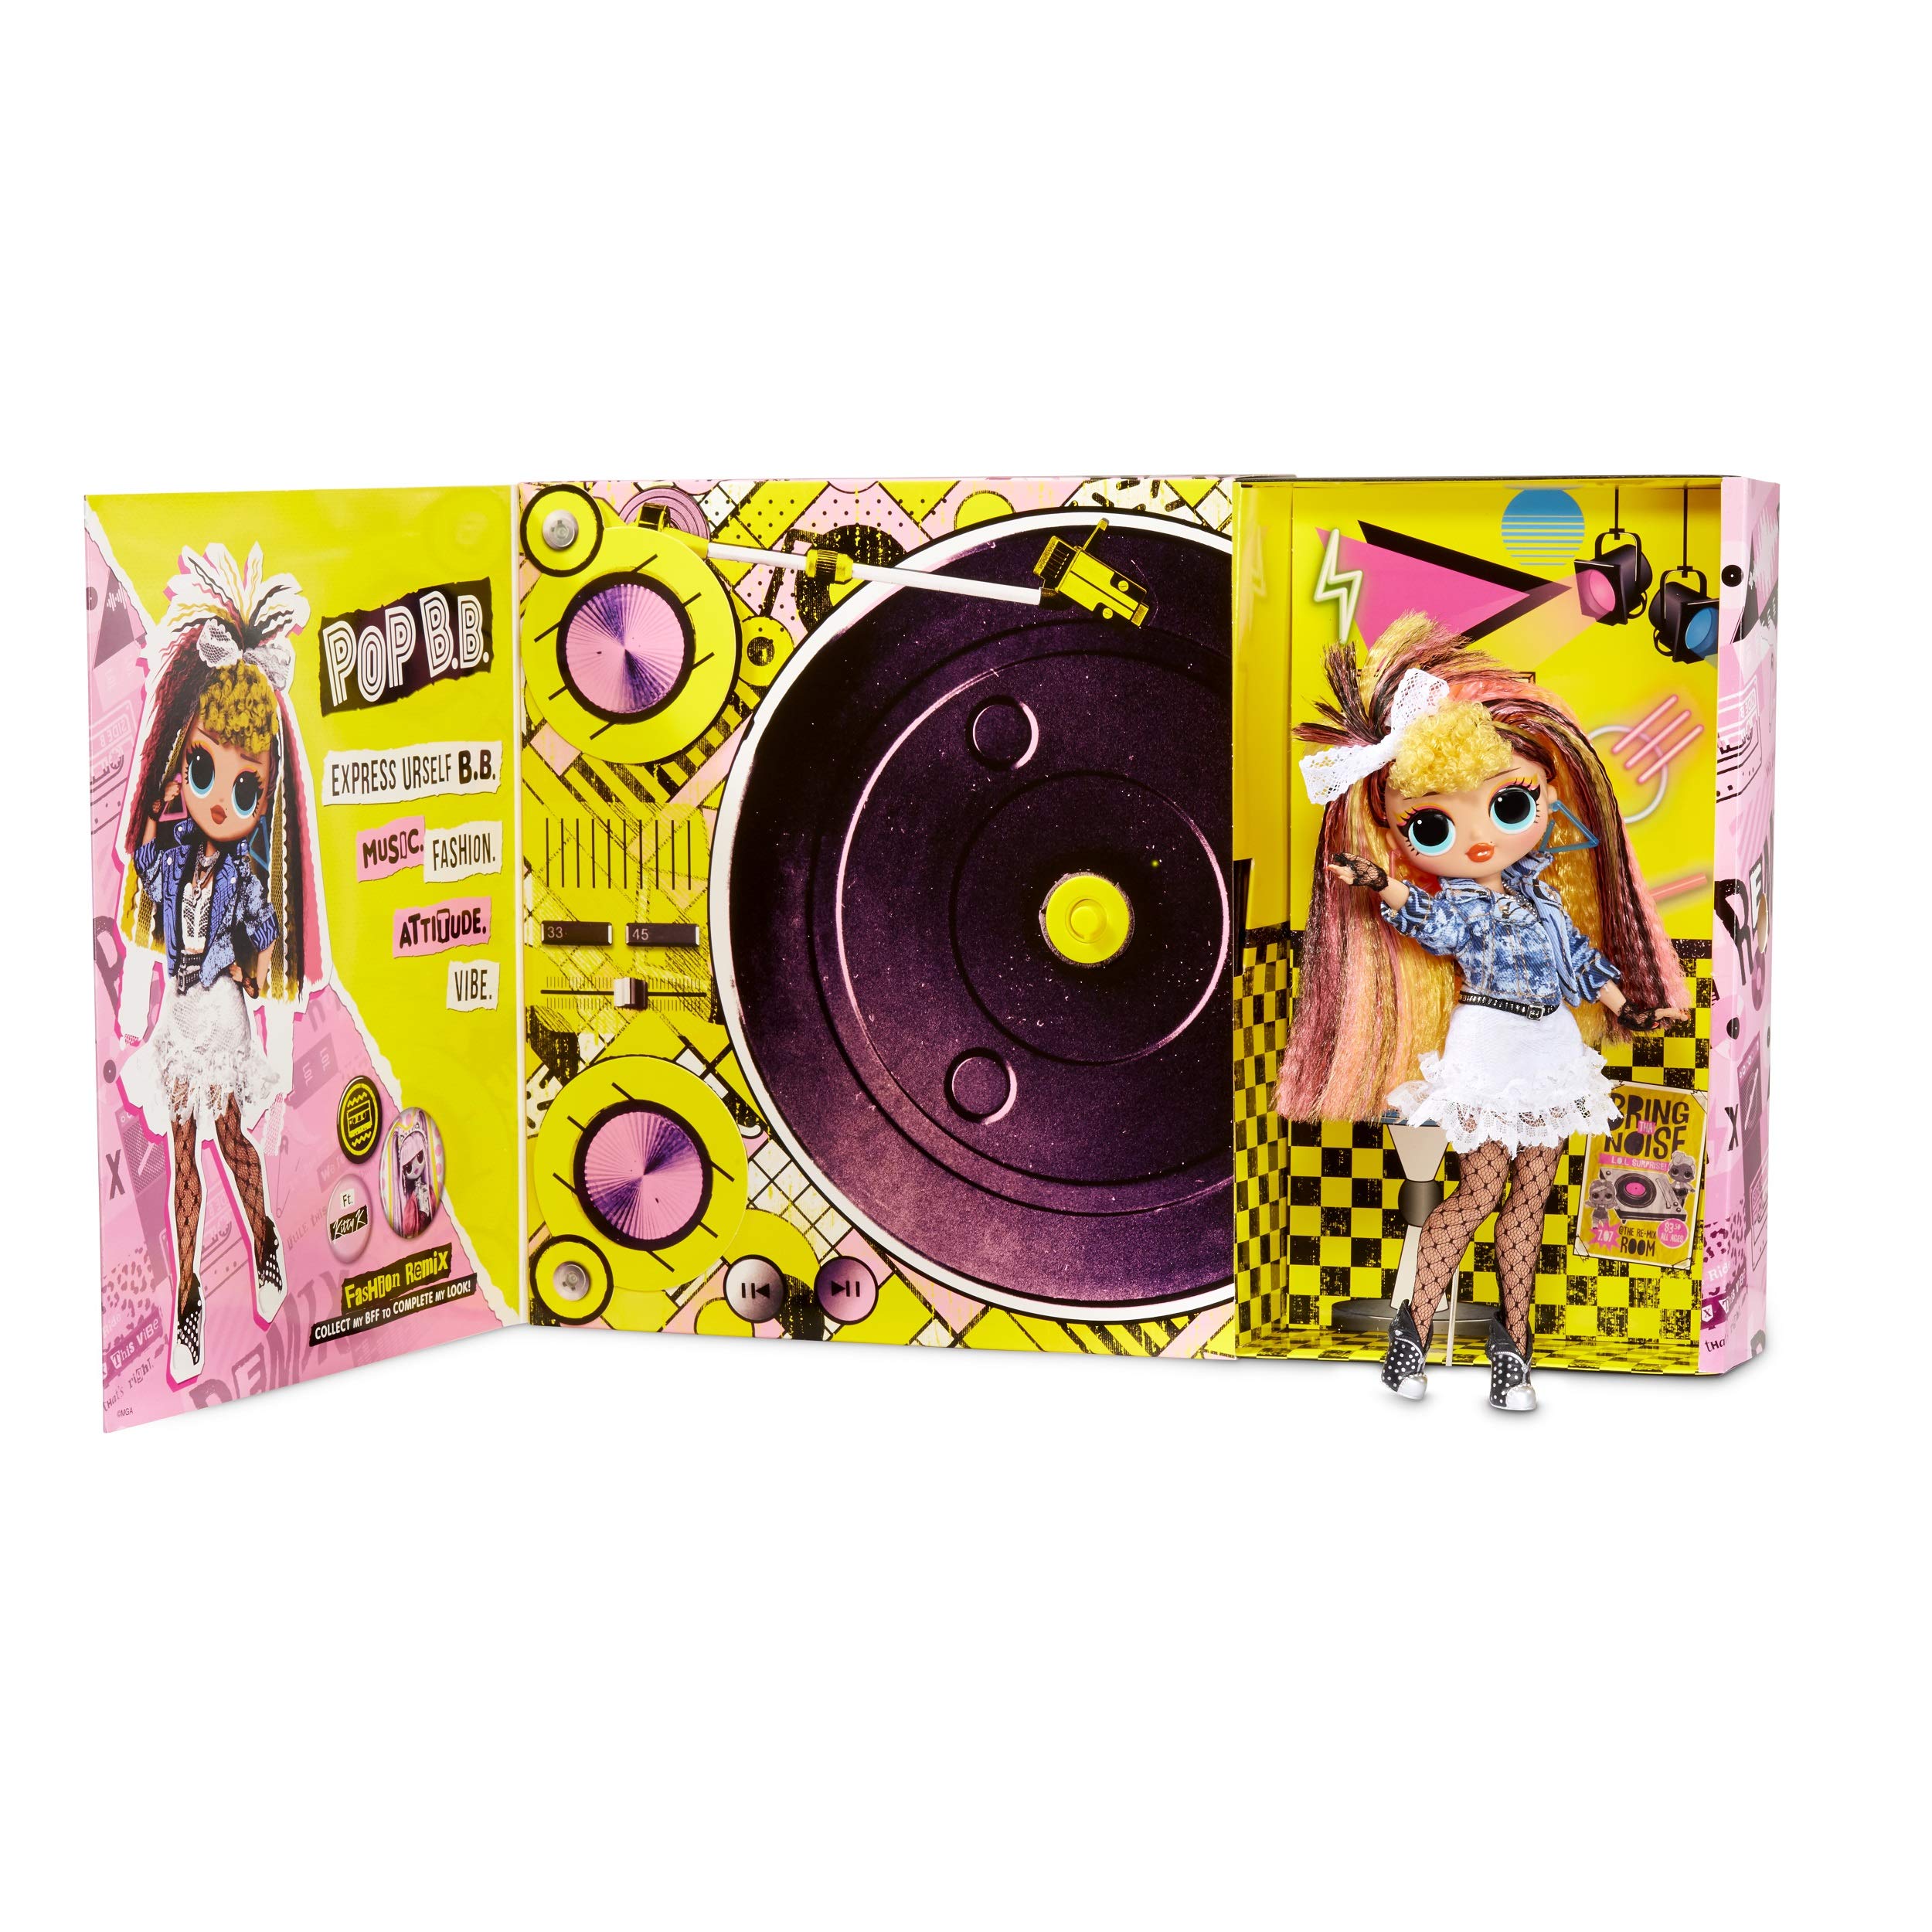 LOL Surprise OMG Remix Pop B.B. Fashion Doll with Music, Extra Outfit, and 25 Accessories - Ages 4+